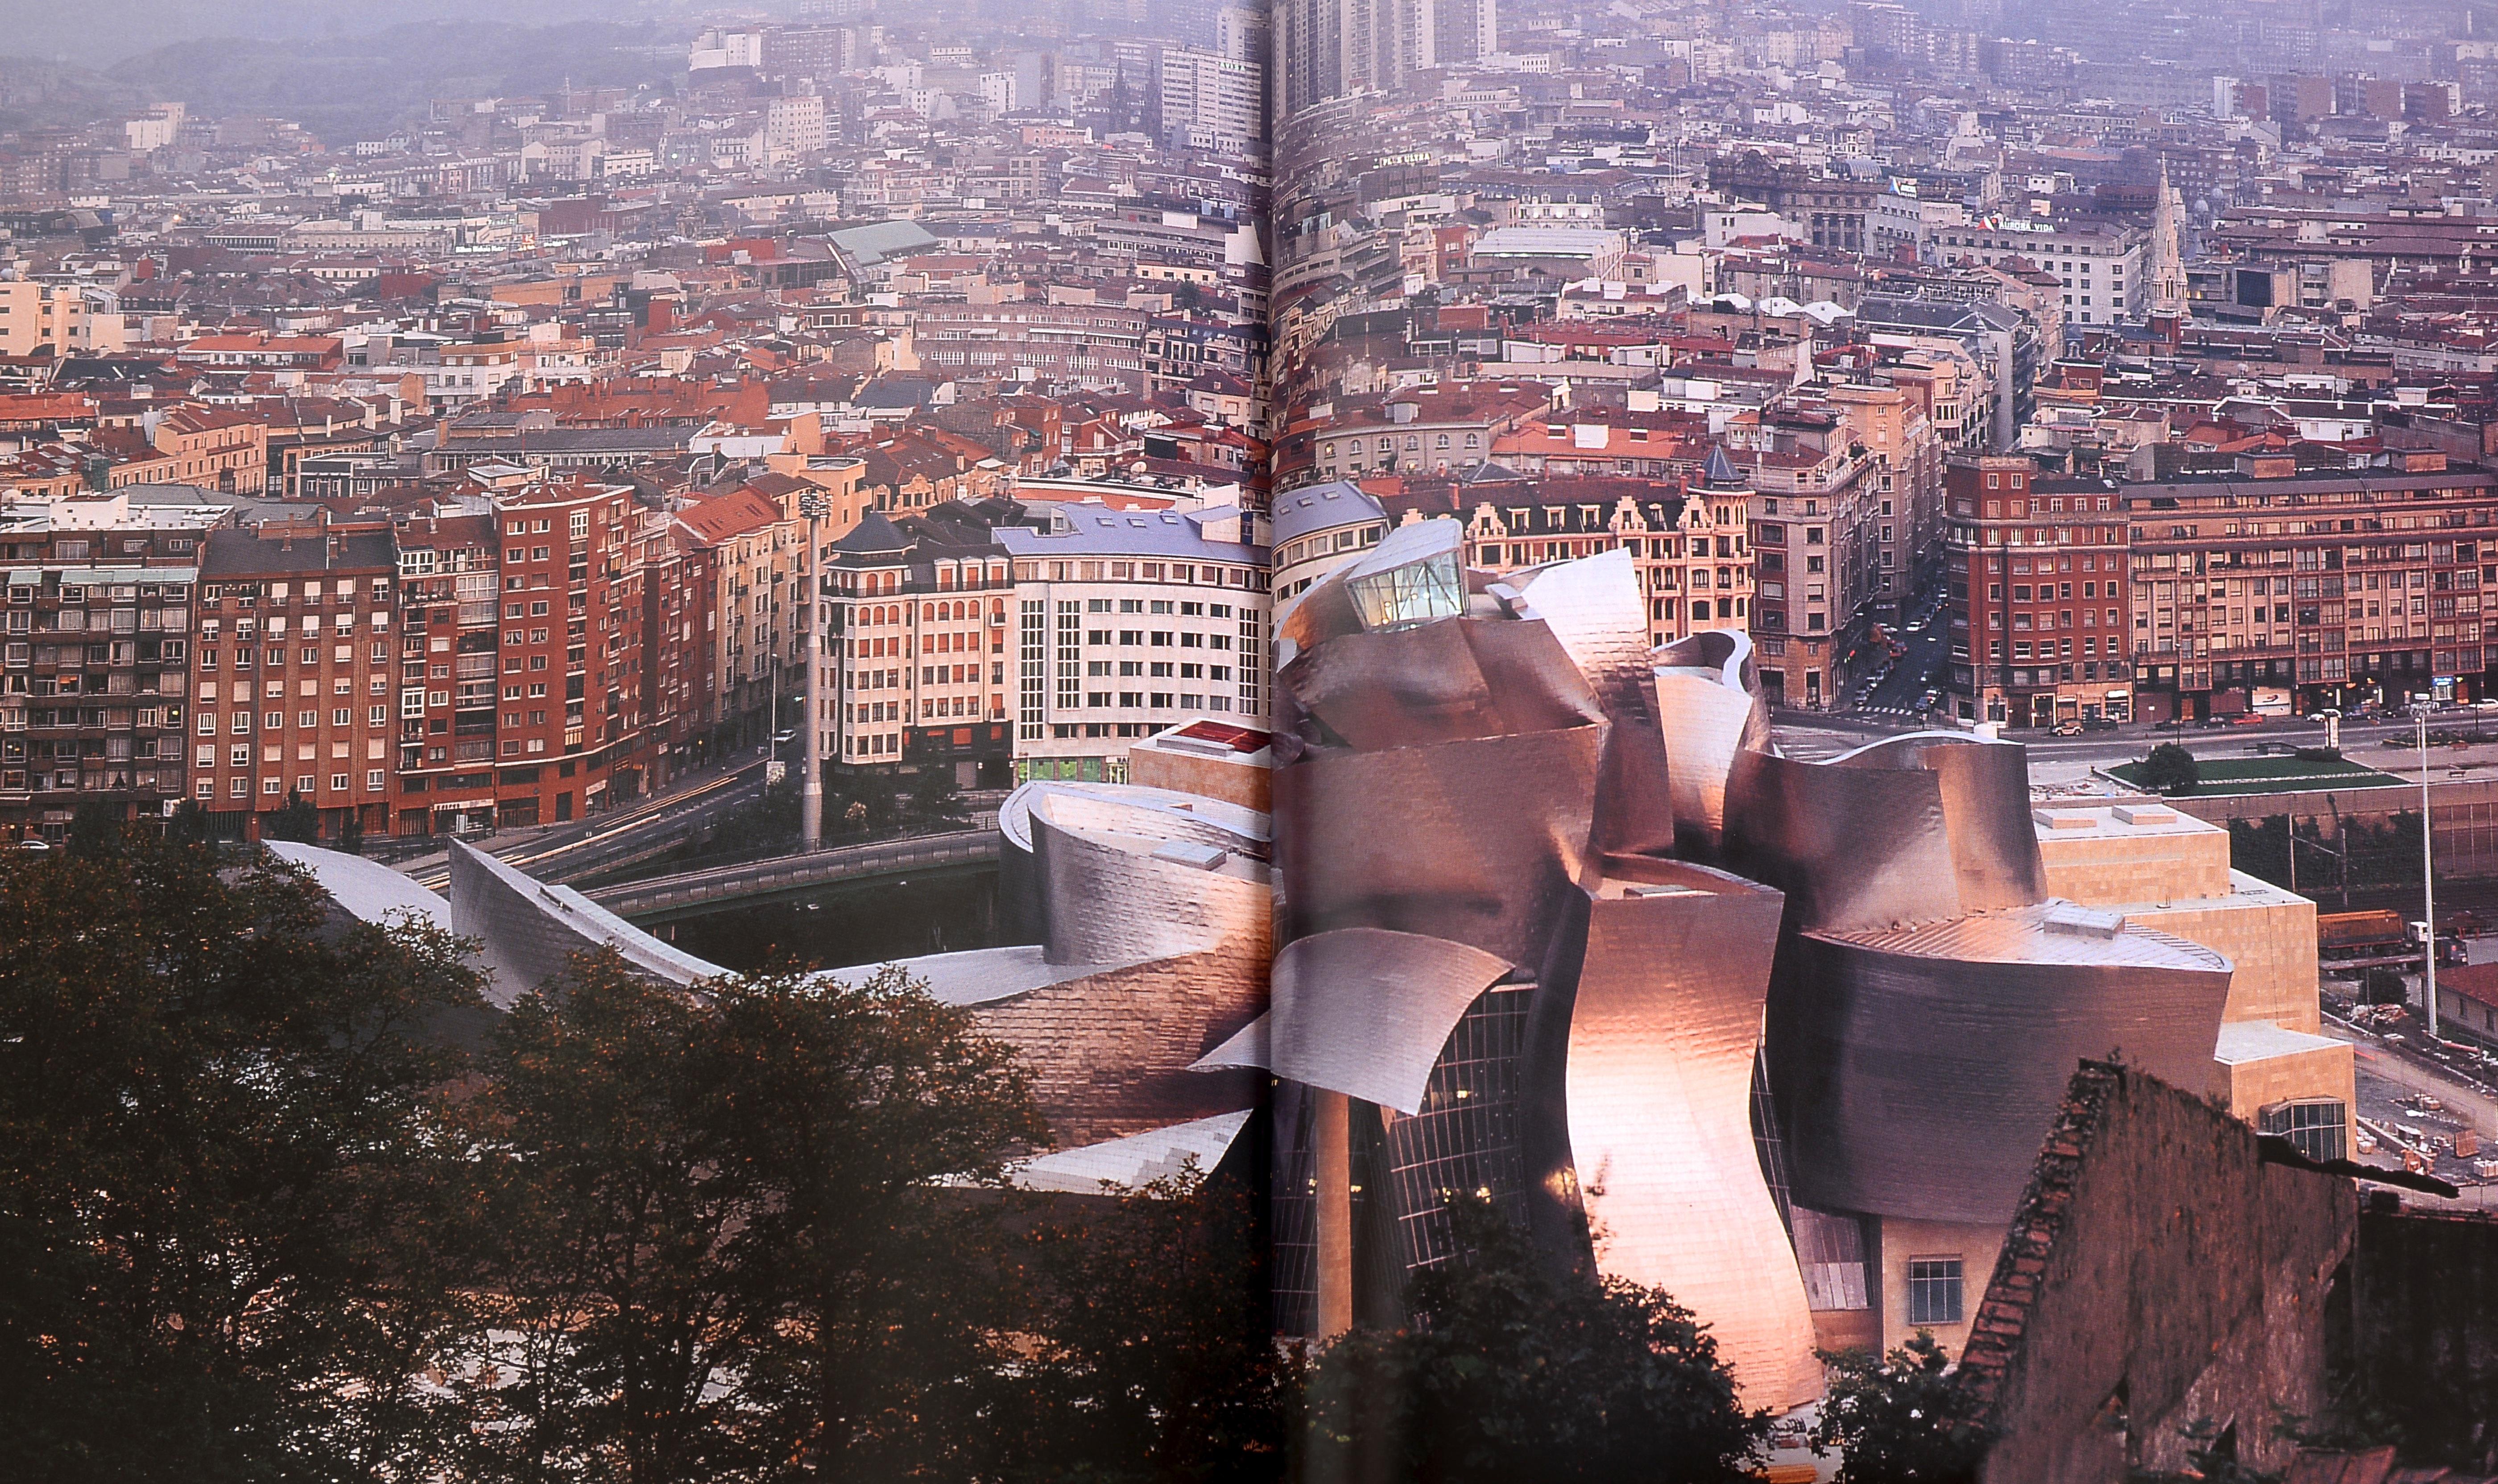 Spanish Frank O.Gehry, Guggenhiem Museum Bilbao, 1st Ed For Sale